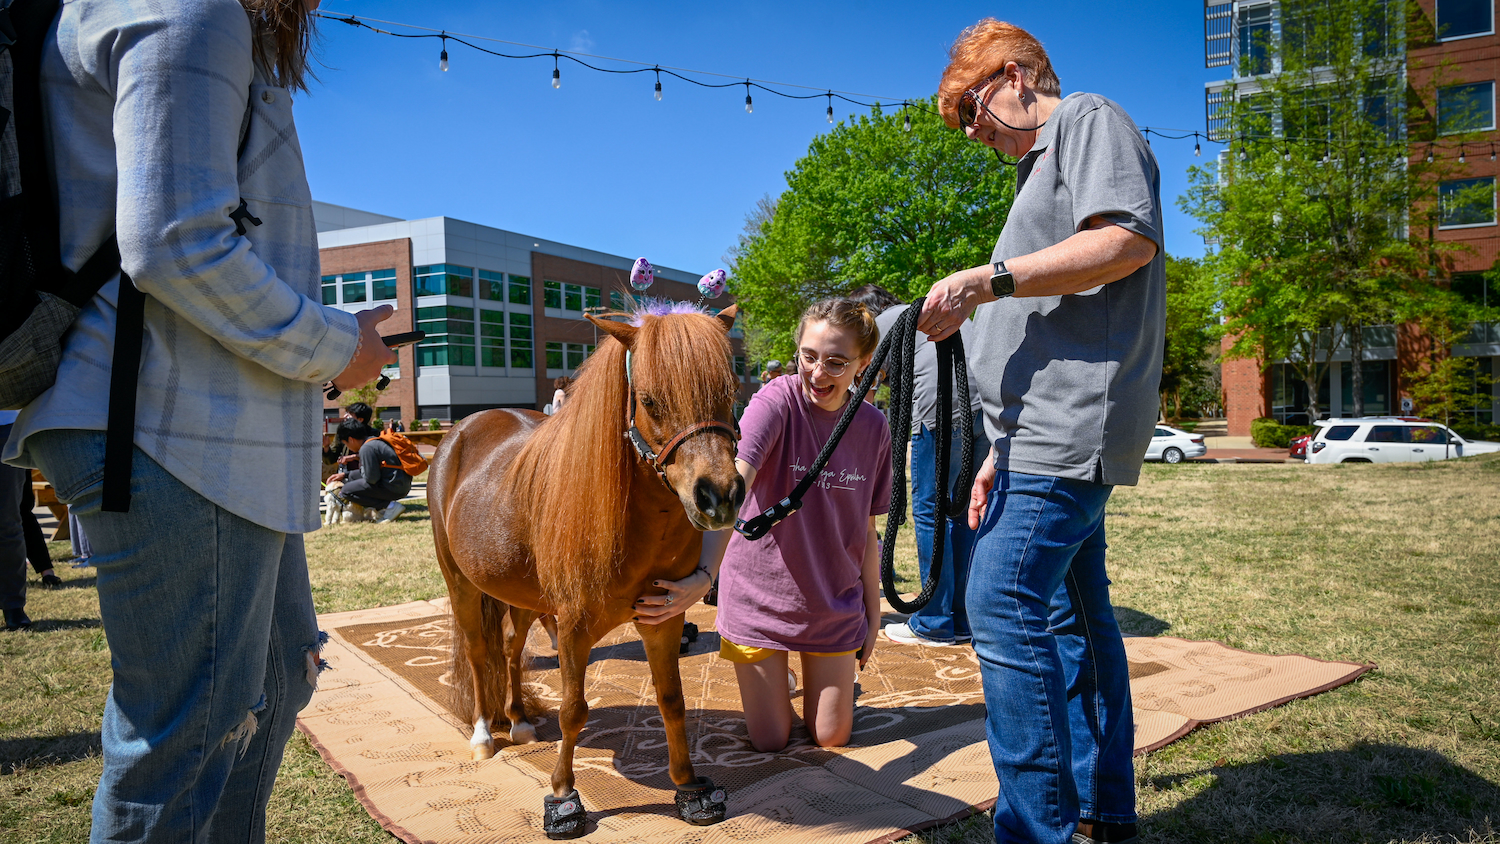 Therapy miniature horses from Stampede of Love, as well as therapy dogs, provide a wellness break from the end of semester rush.